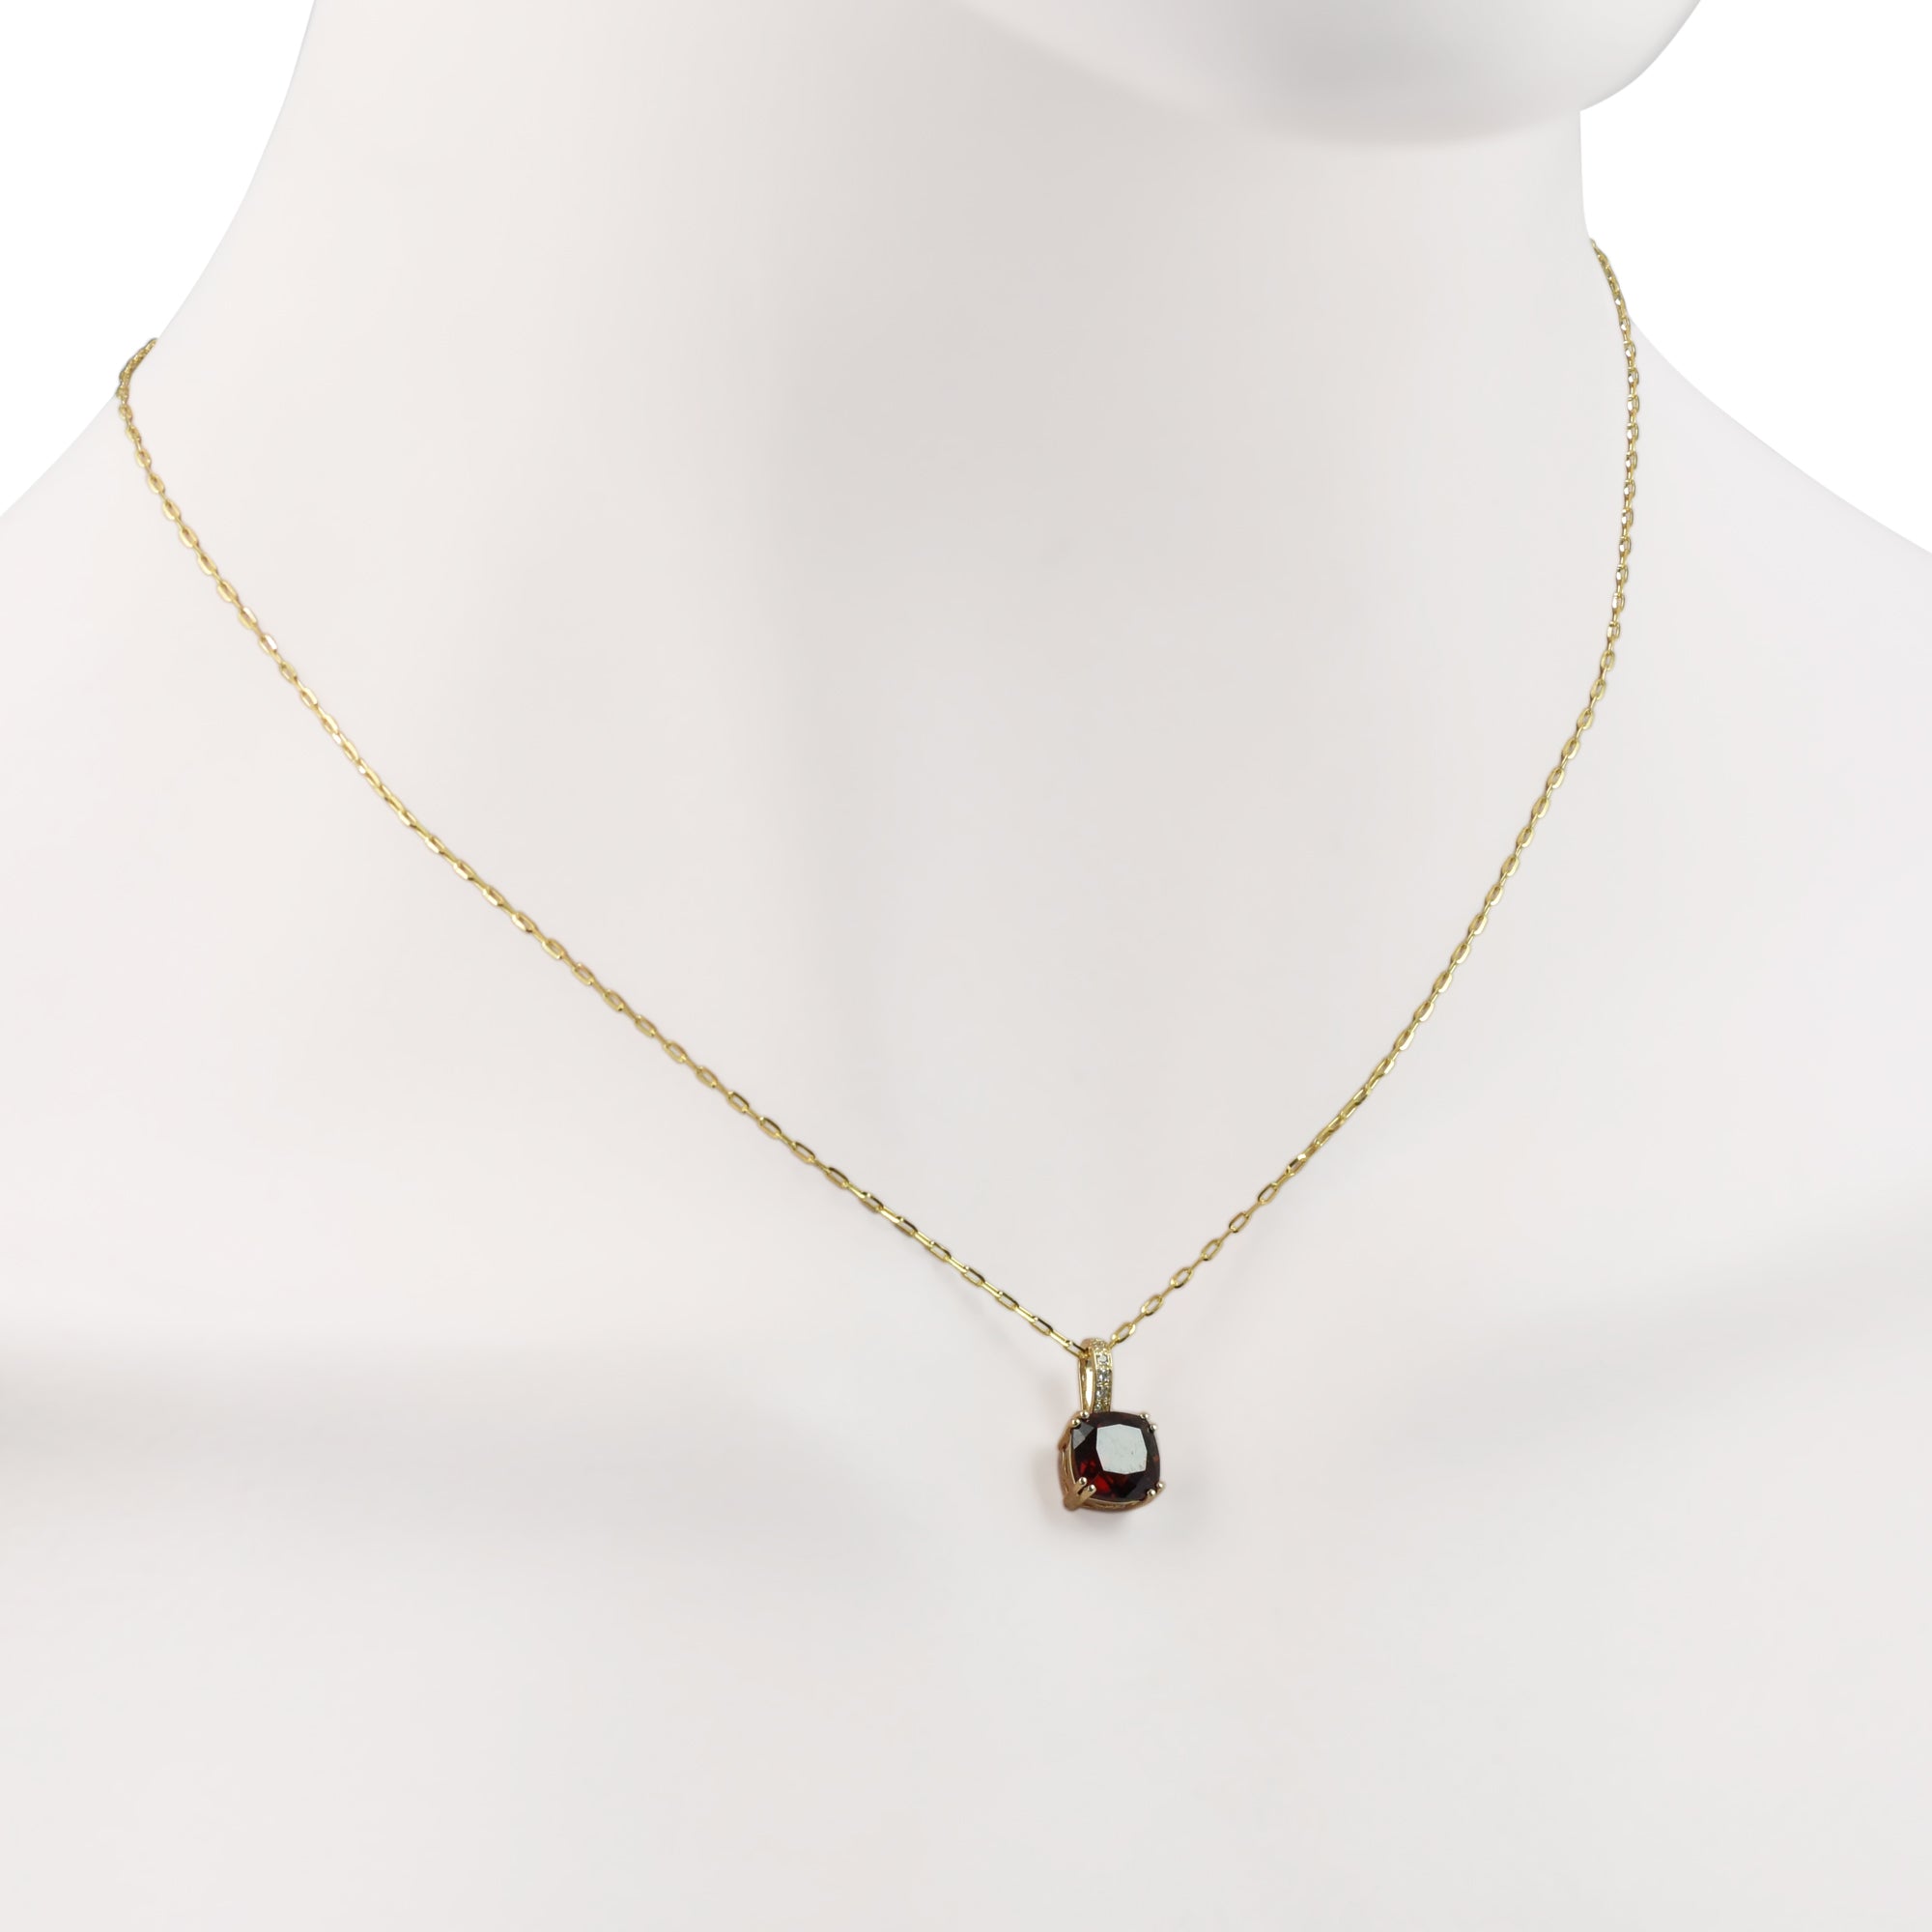 Madison L Cushion Garnet Necklace in 14kt Yellow Gold with Diamonds (1/20ct tw)